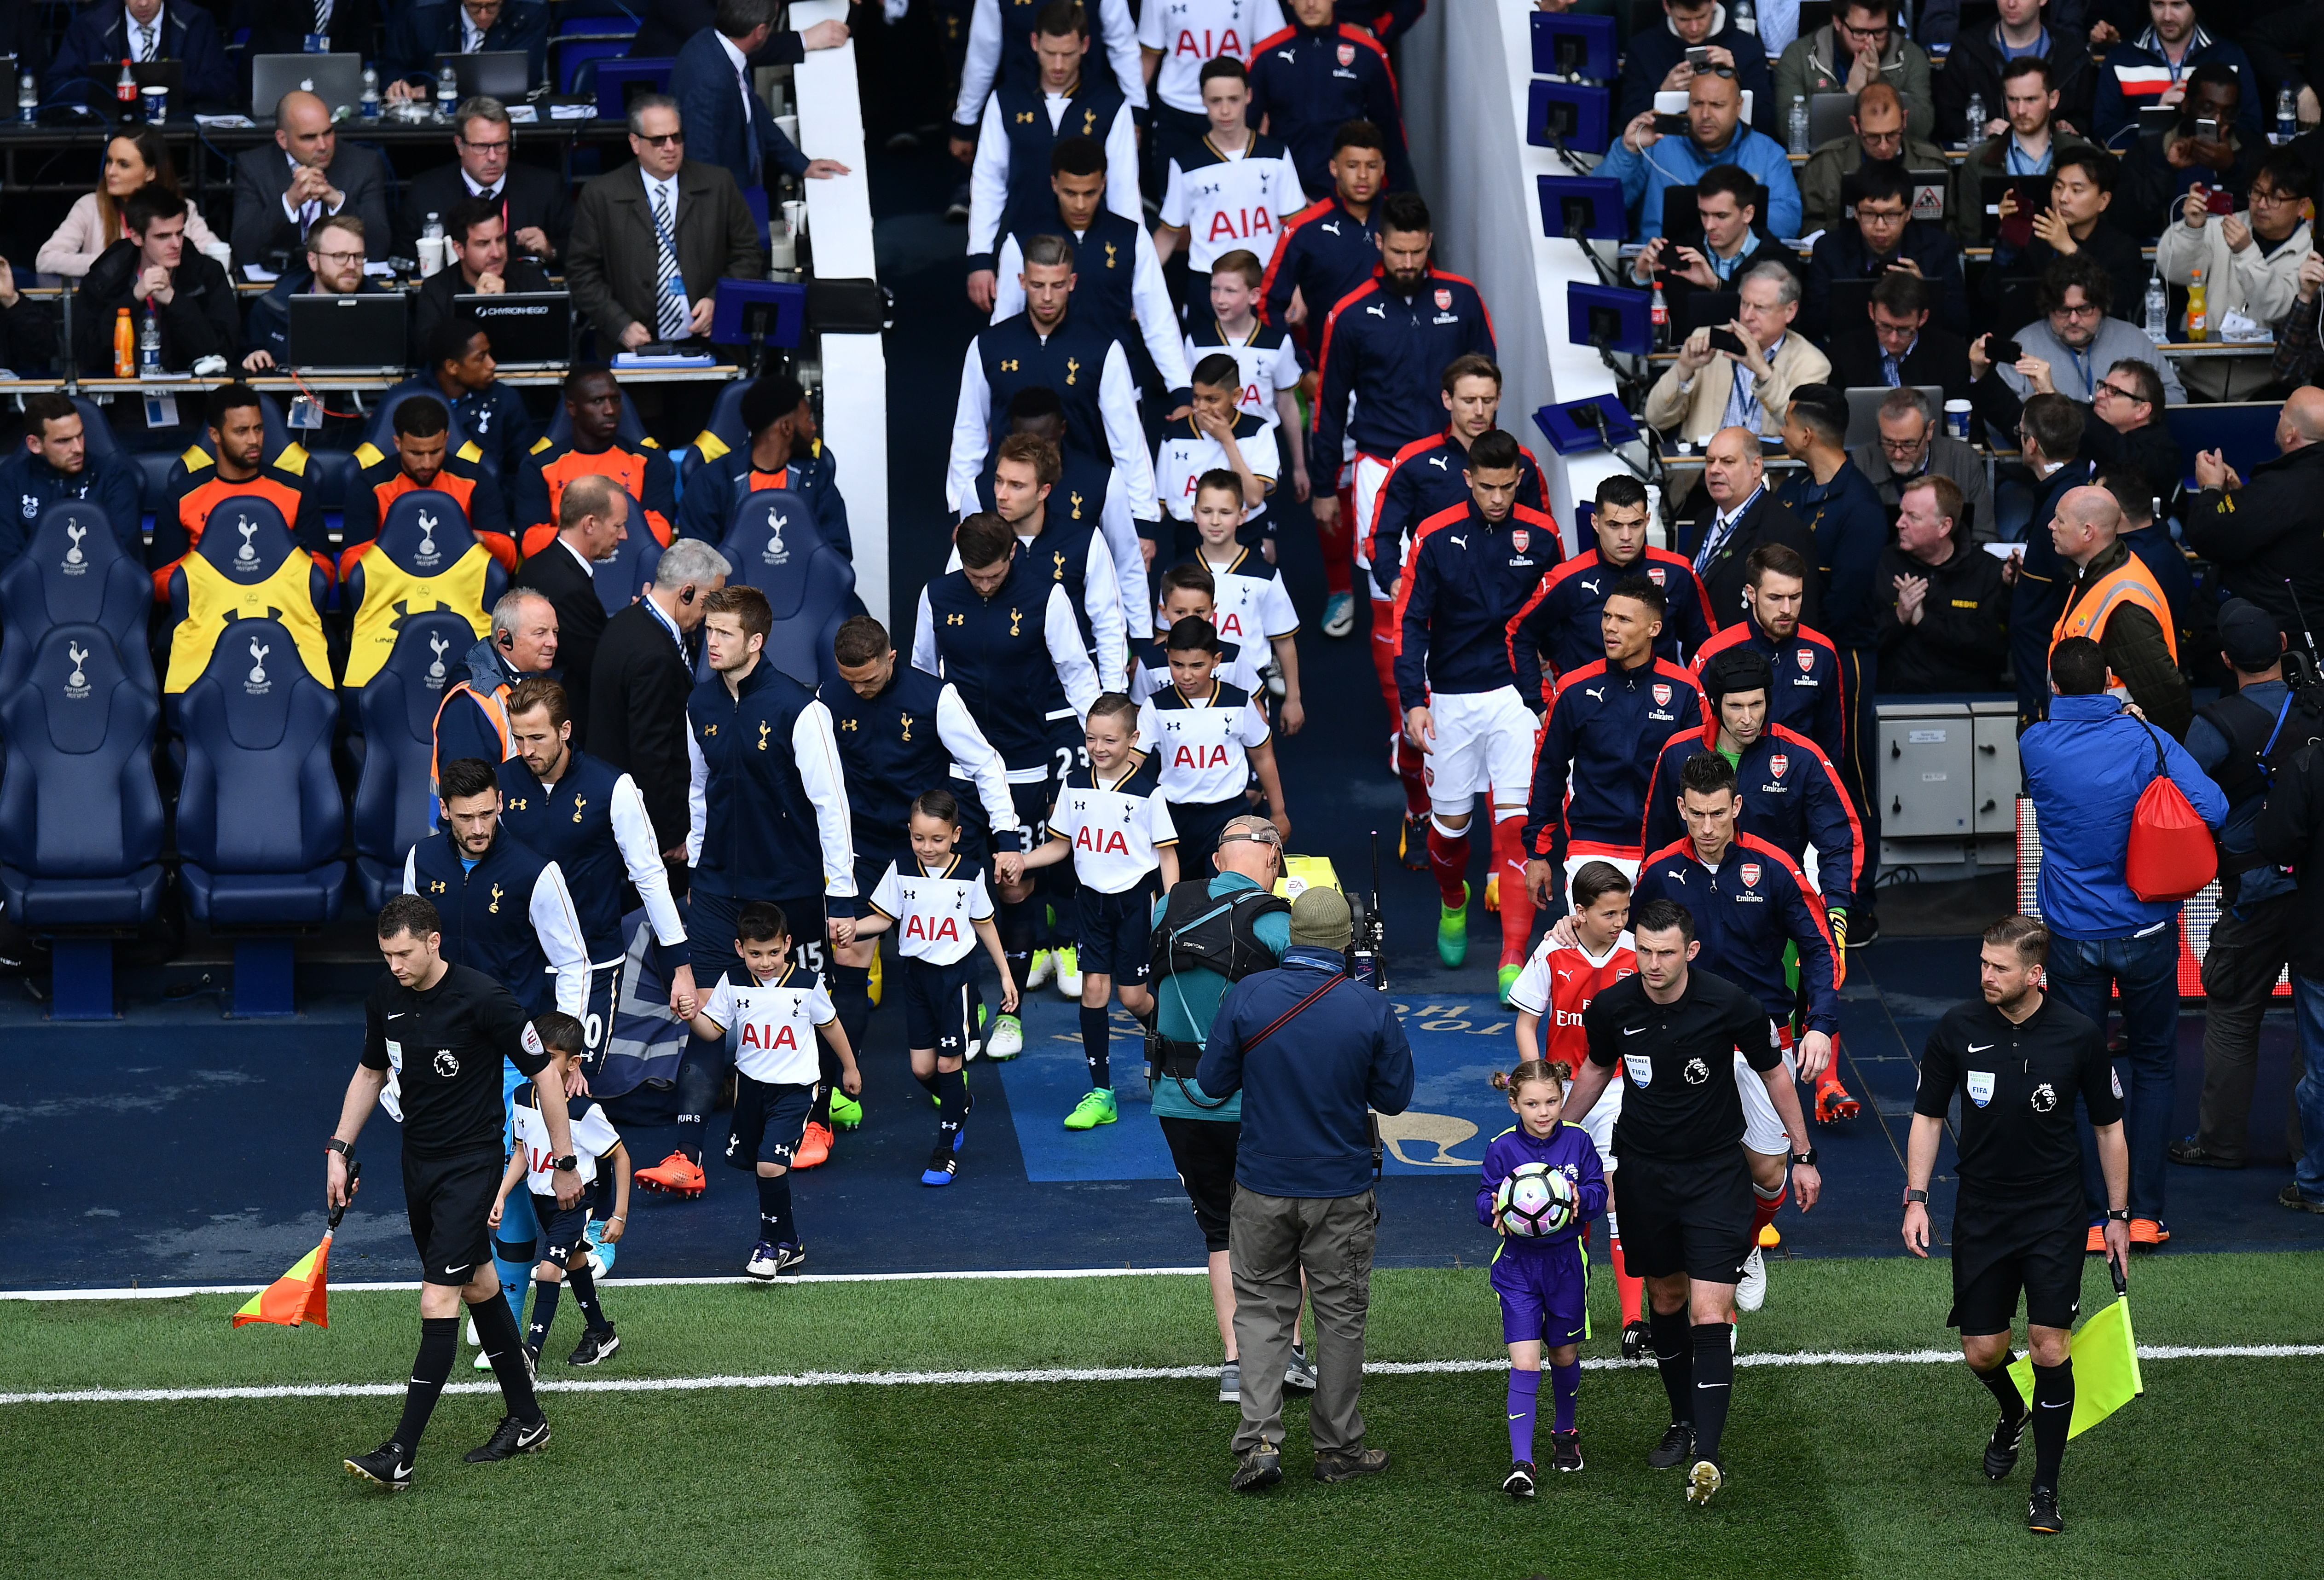 LONDON, ENGLAND - APRIL 30:  The teams make their way out onto the pitch prior to the Premier League match between Tottenham Hotspur and Arsenal at White Hart Lane on April 30, 2017 in London, England. (Photo by Dan Mullan/Getty Images)